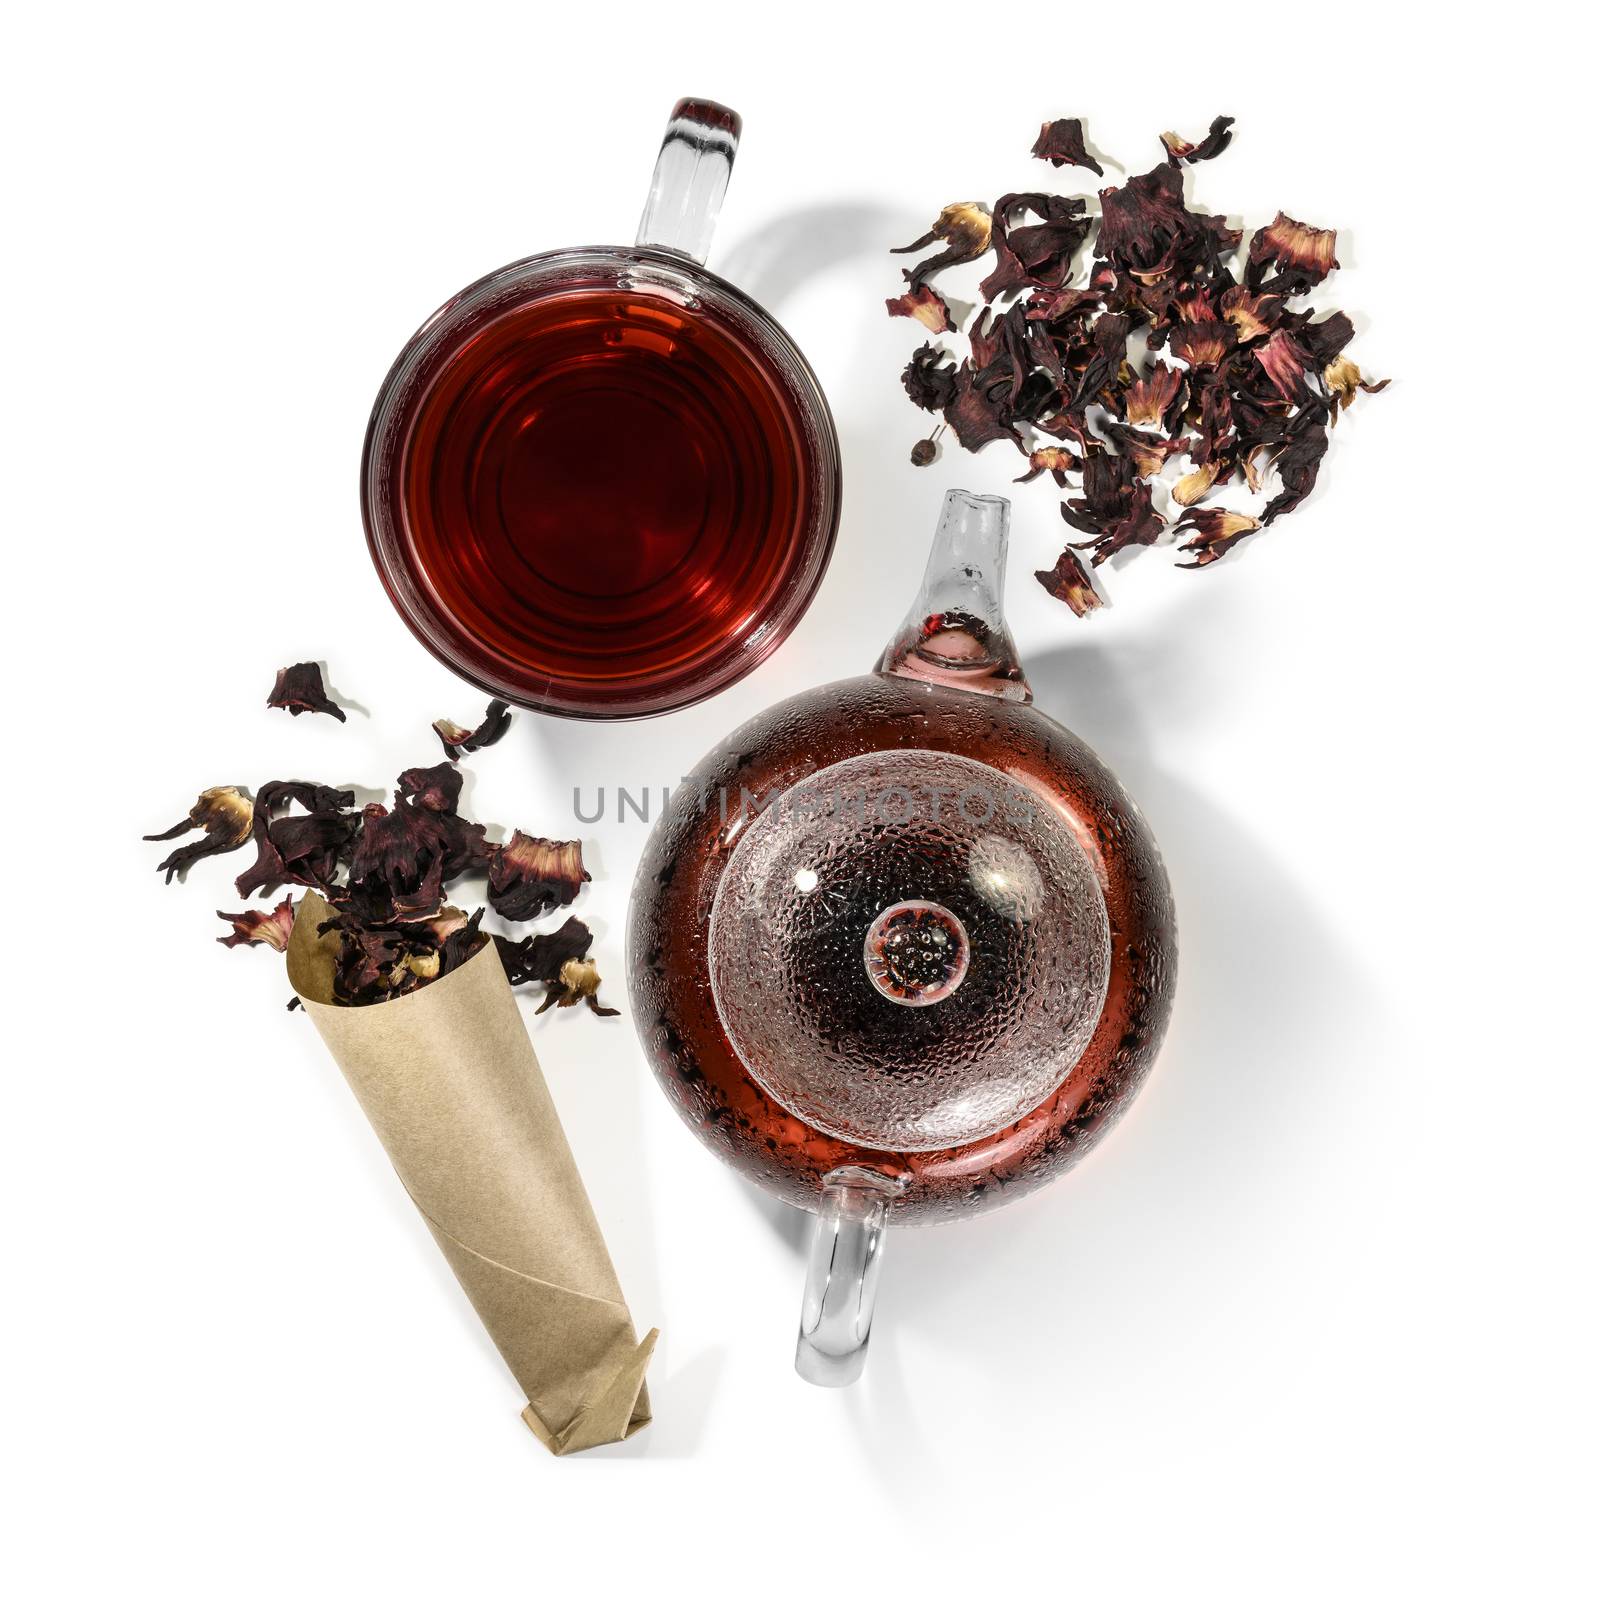 Hibiscus tea and beverage accessories on white background.